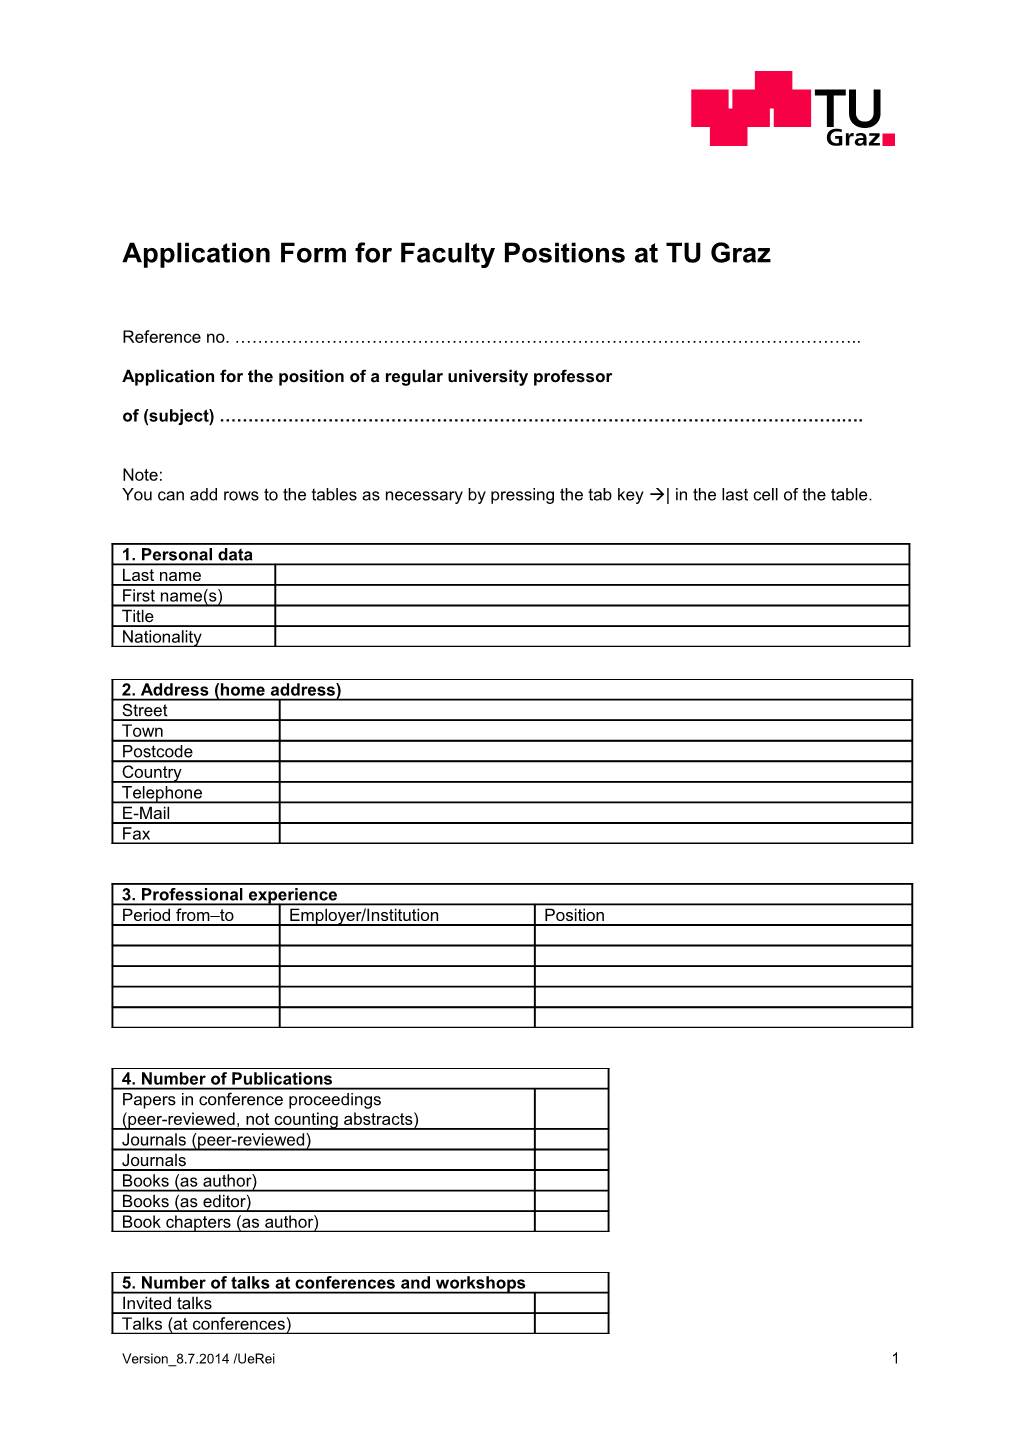 Application Formfor Faculty Positions at TU Graz